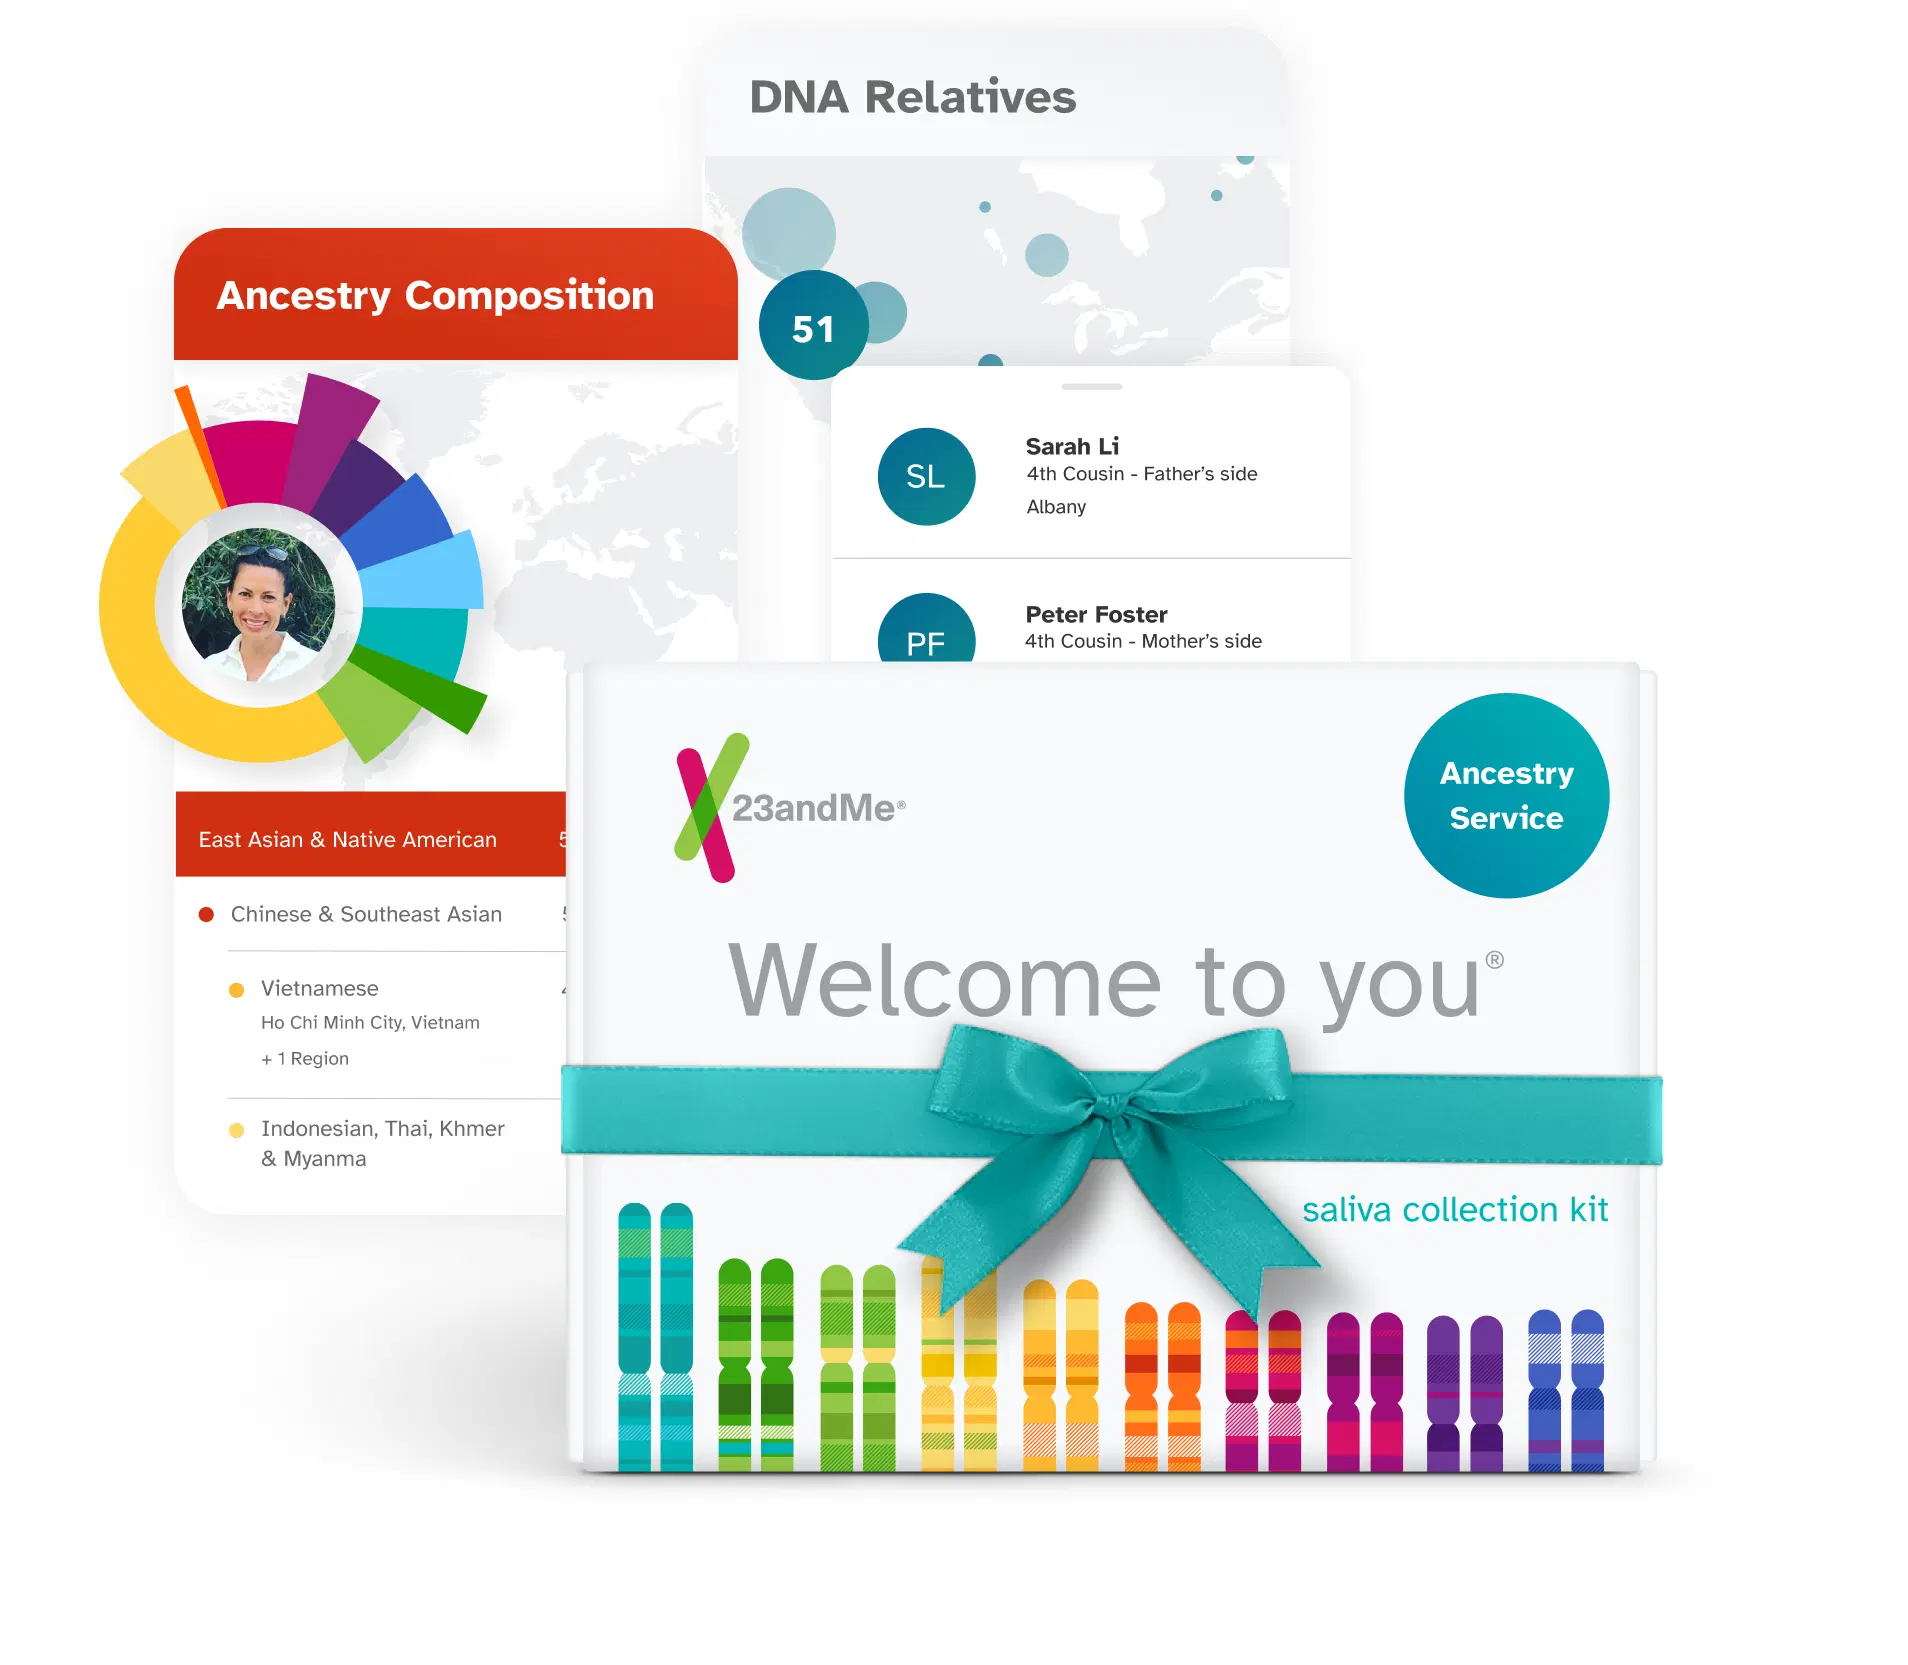 23andMe Ancestry Service saliva collection Kit with example reports Ancestry Composition and DNA Relatives. Ancestry Composition report displays example percentages for East Asian and Native American, Chinese and Southeast Asian, Vietnamese, Ho Chi Minh City, Vietnam, plus 1 region, Indonesian, Thai, Khmer, and Myanma. DNA Relatives report displays example relatives: 51 total relatives, Sarah Li - 4th Cousin - Father’s Side in Albany, Peter Foster - 4th Cousin - Mother’s side.